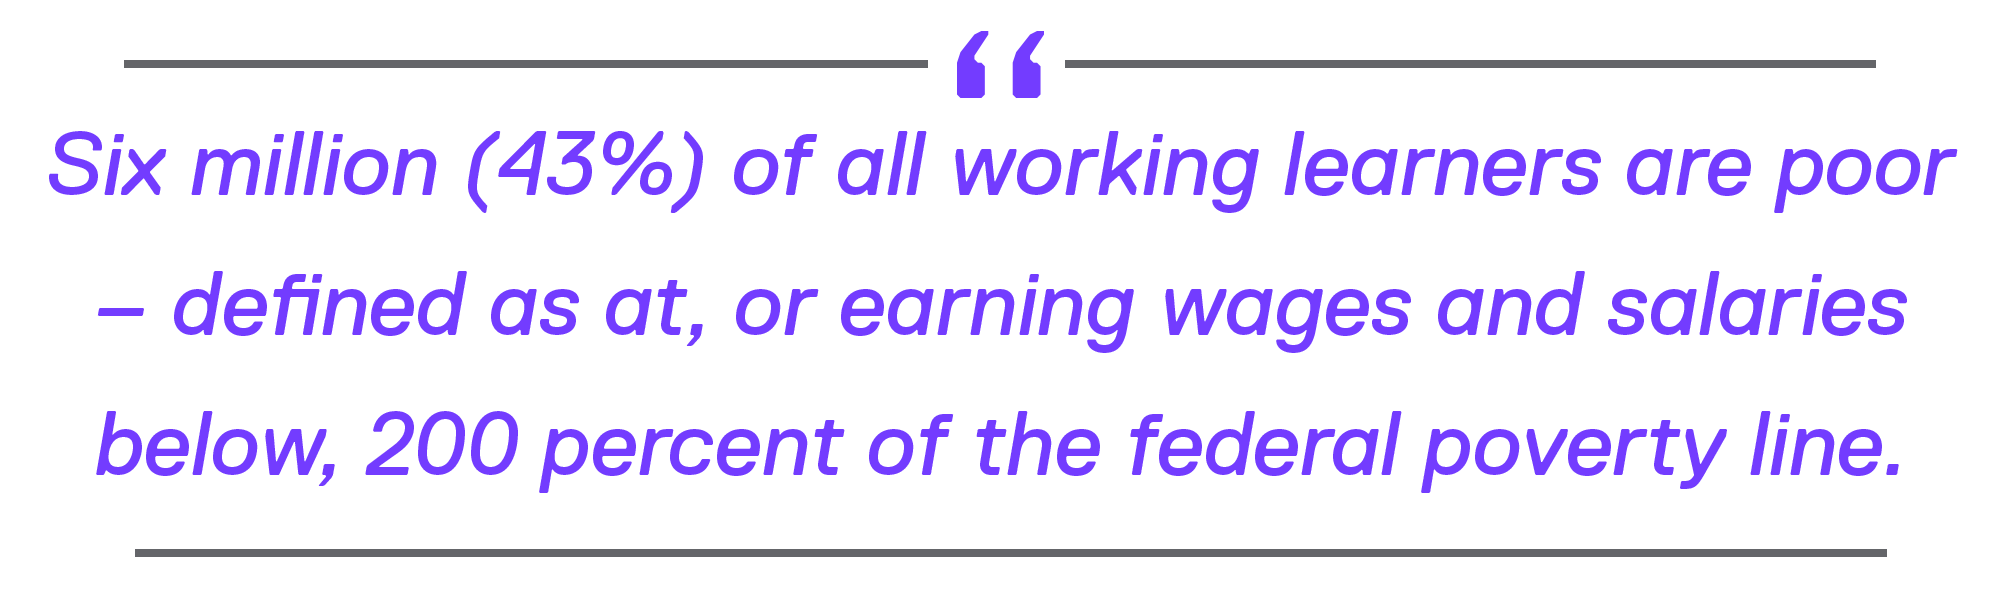 Six million (43%) of all working learners are poor – defined as at, or earning wages and salaries below, 200 percent of the federal poverty line.